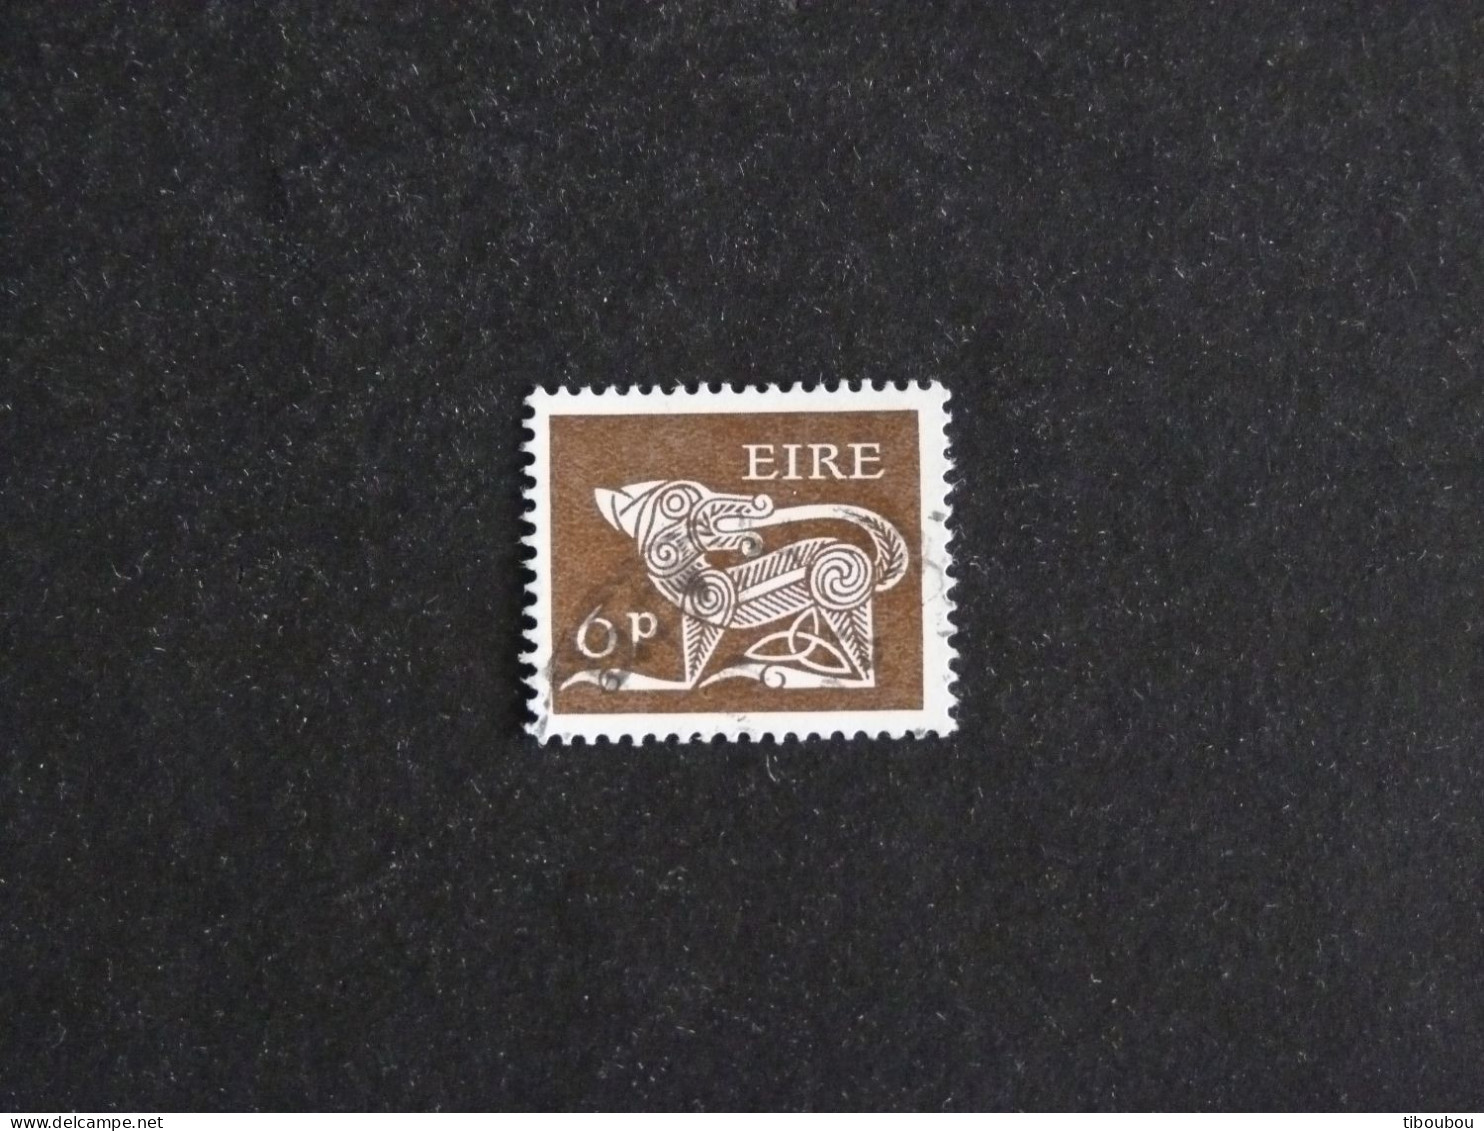 IRLANDE IRELAND EIRE YT 217 OBLITERE - CHIEN STYLISE BROCHE ANCIENNE - Used Stamps